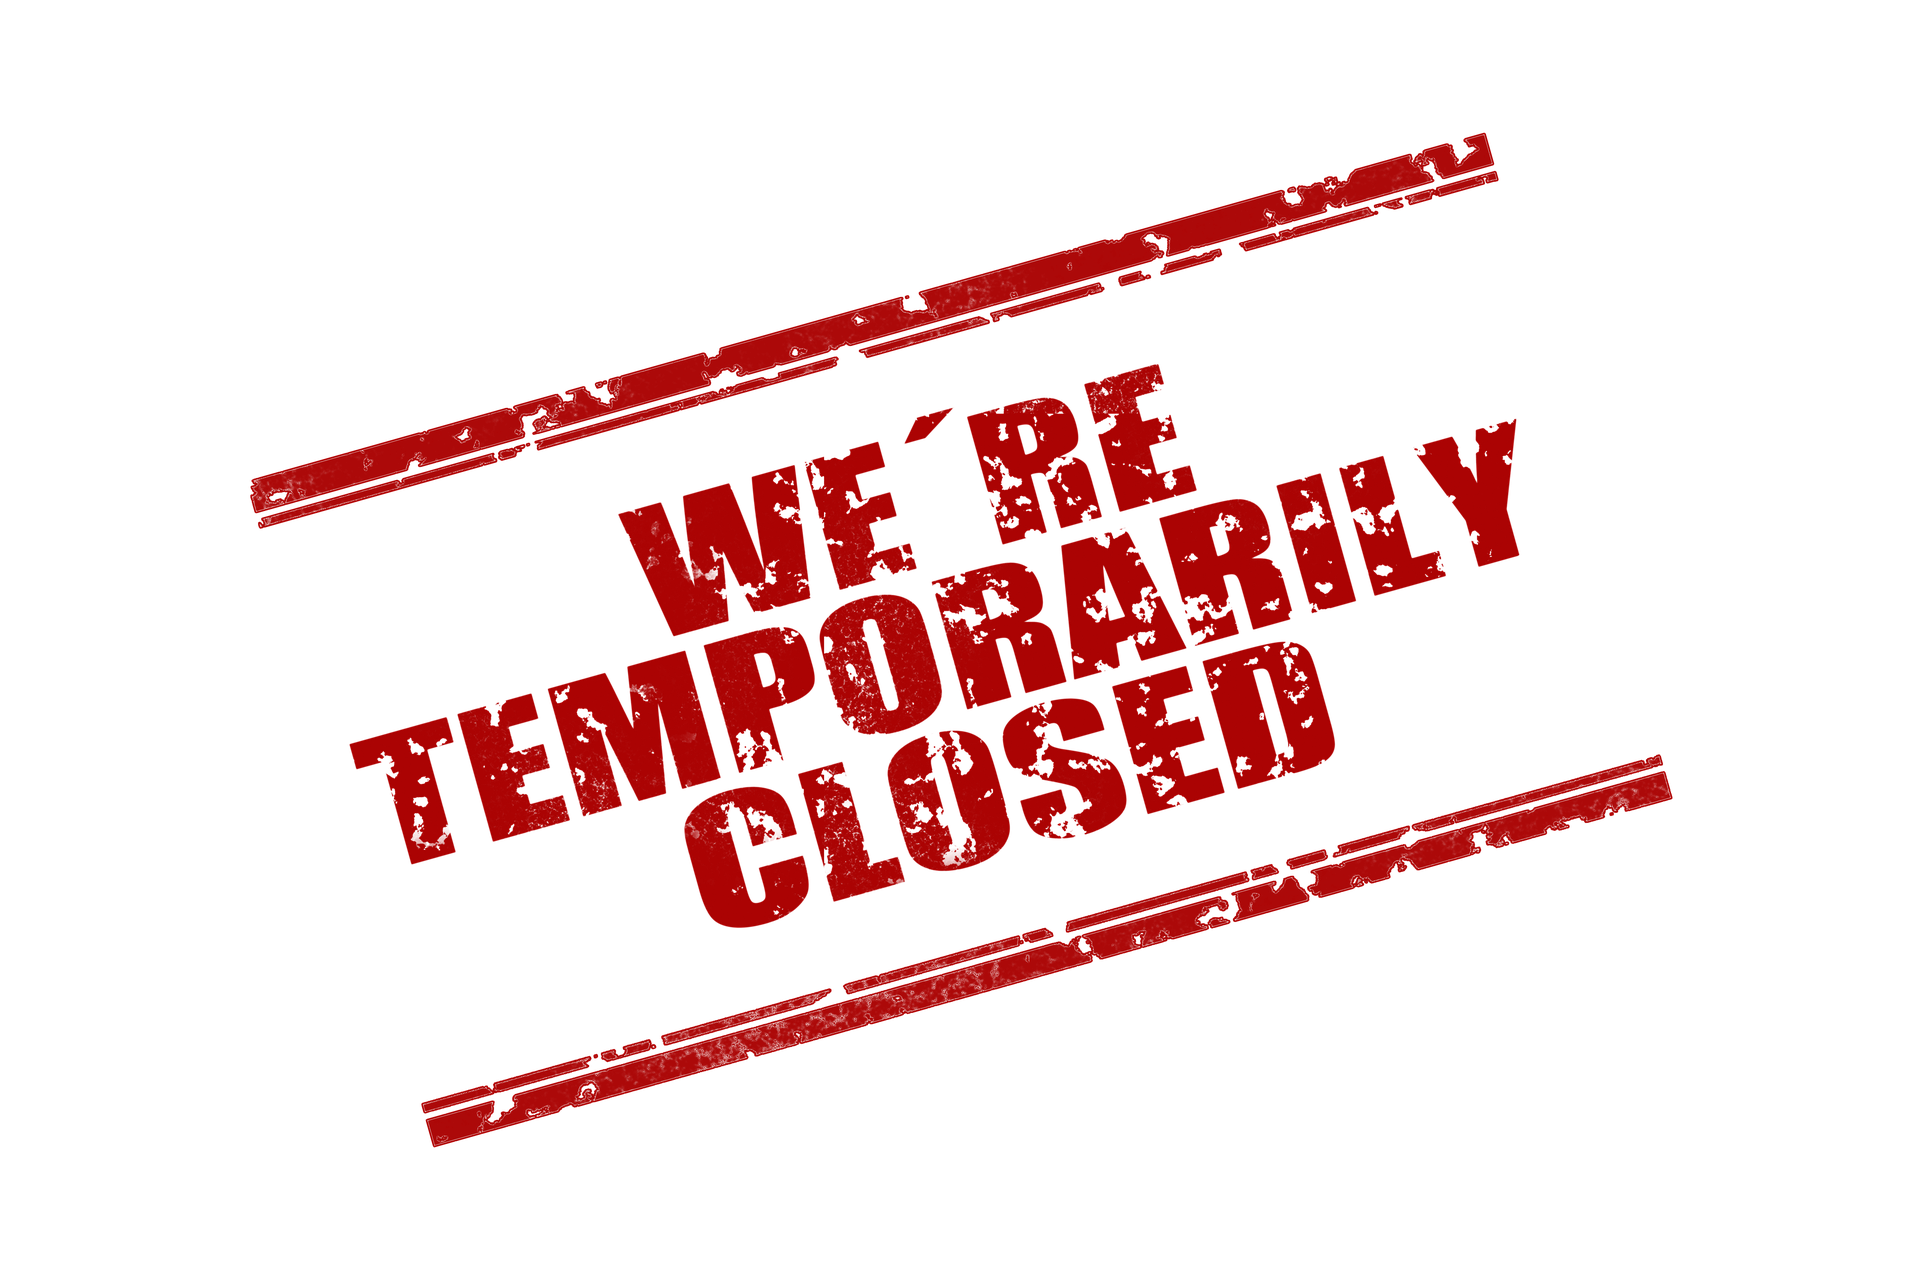 Stamp We are temprorarily closed. Image by Gerd Altmann from Pixabay